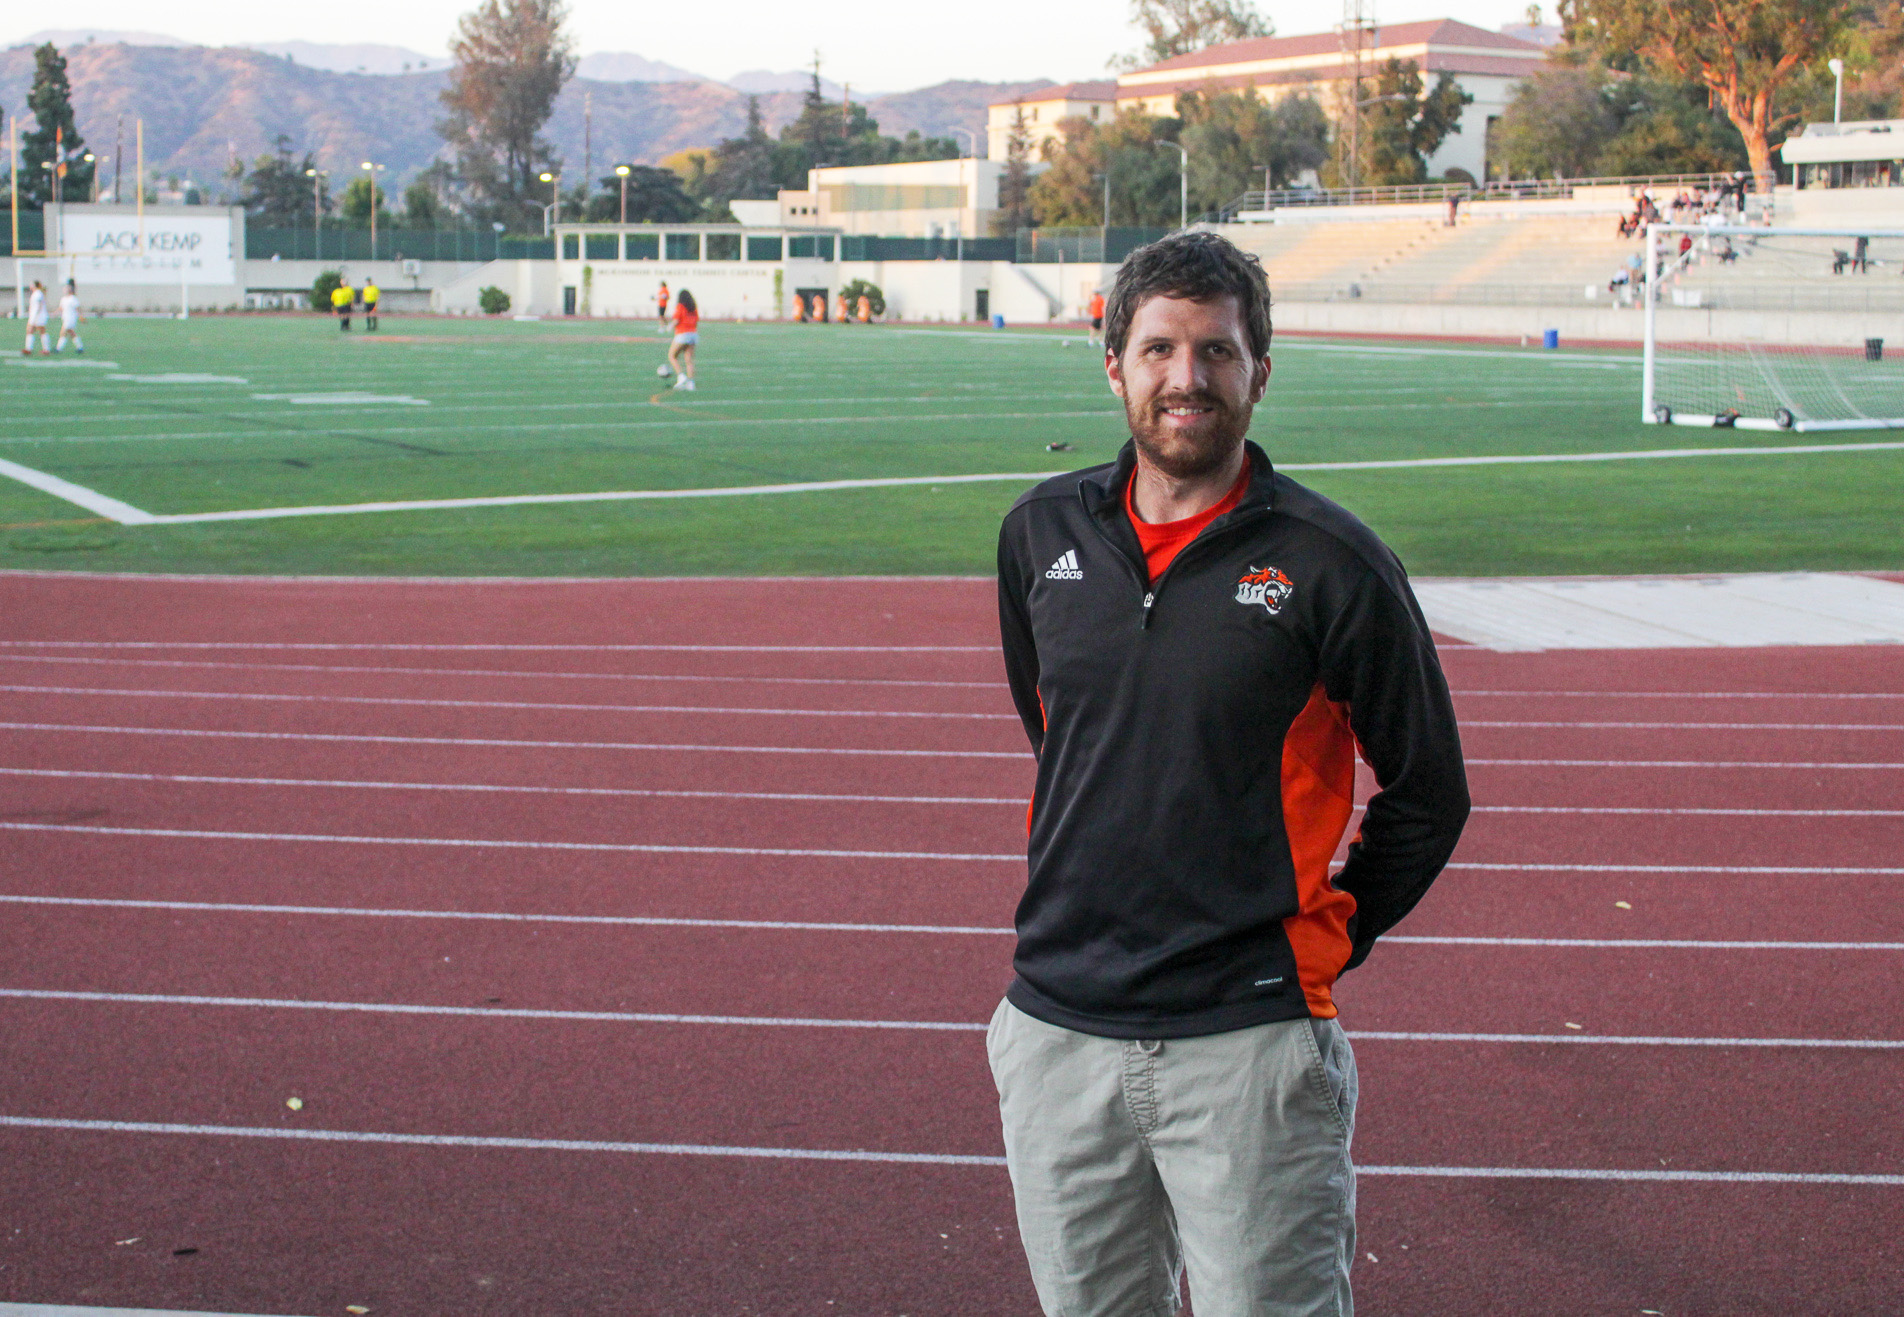 Behind the scenes: Recruiters & athletes make Occidental home for